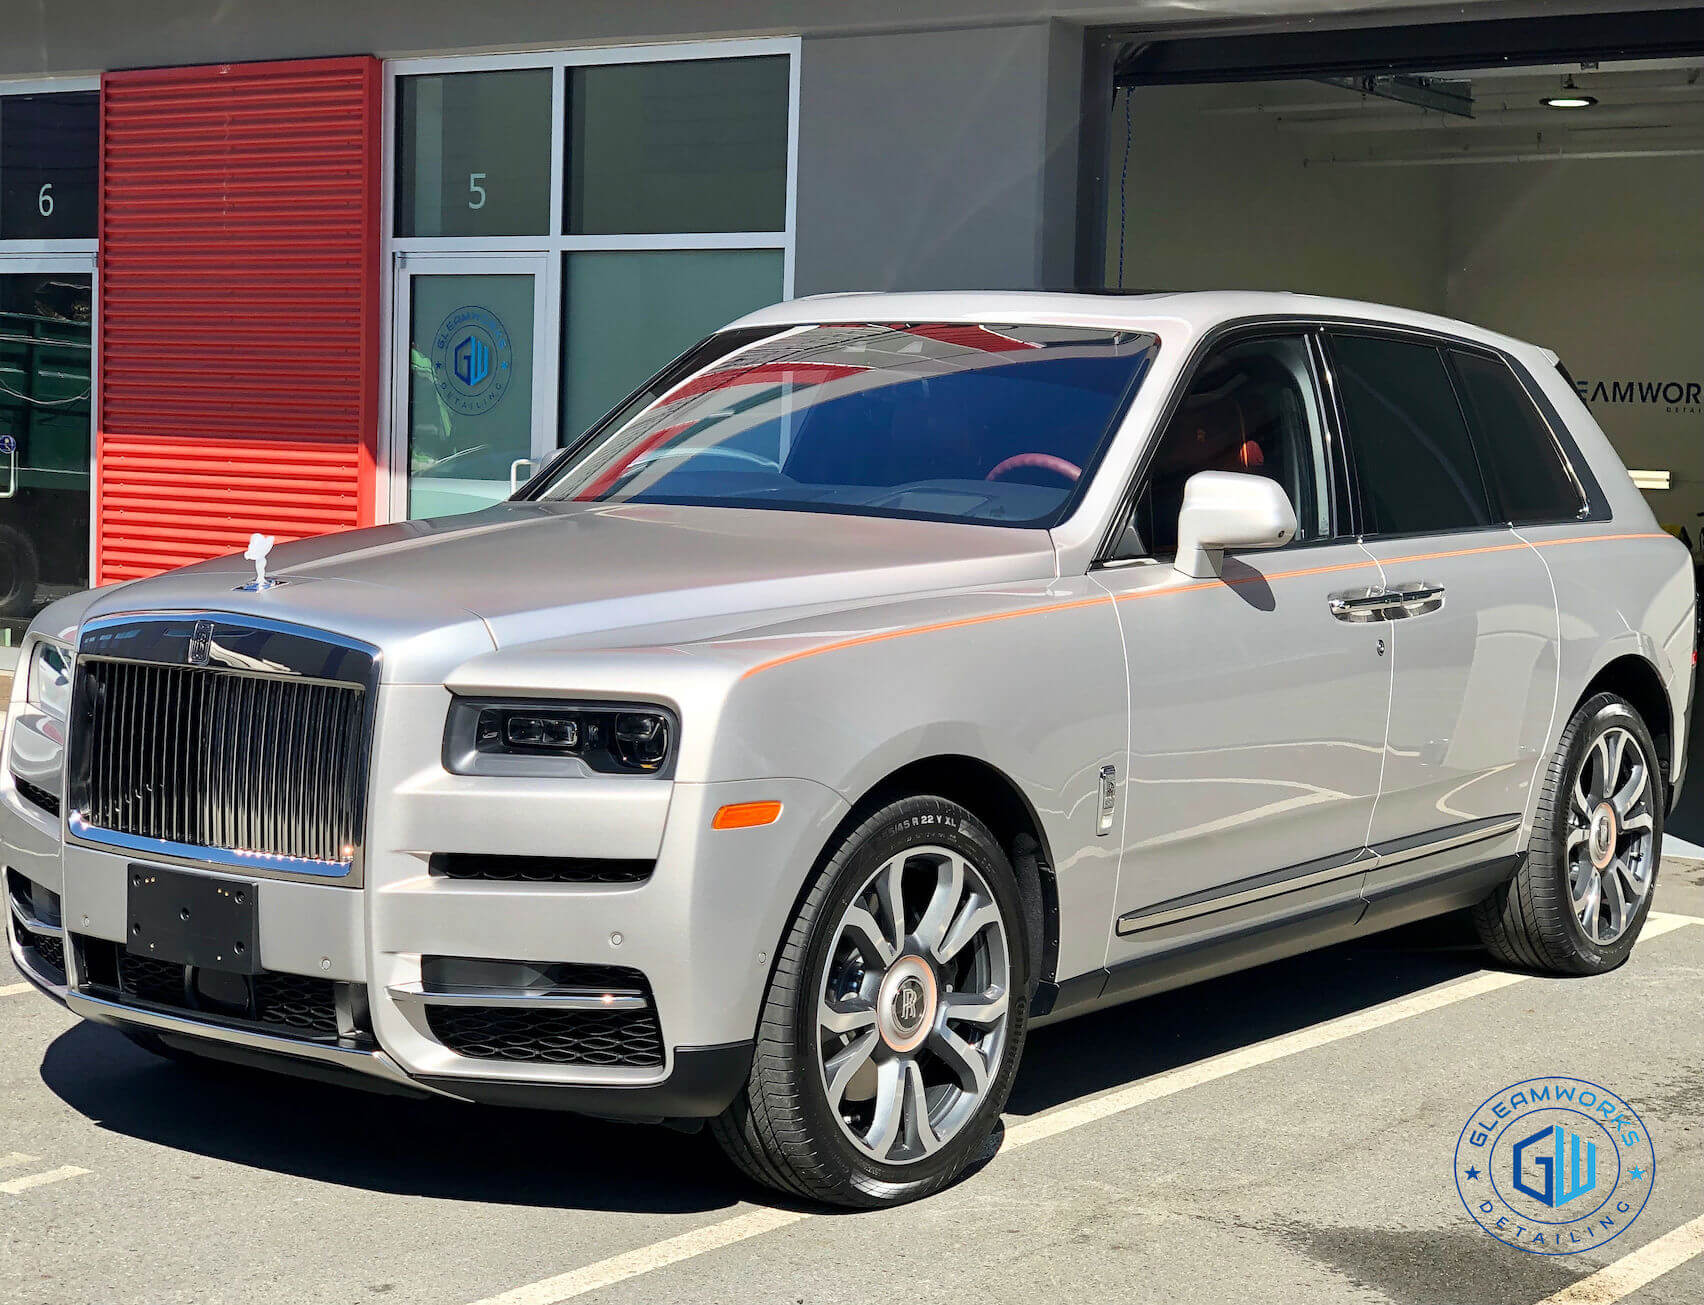 Used 2017 RollsRoyce Cars for Sale in Vancouver WA Test Drive at Home   Kelley Blue Book